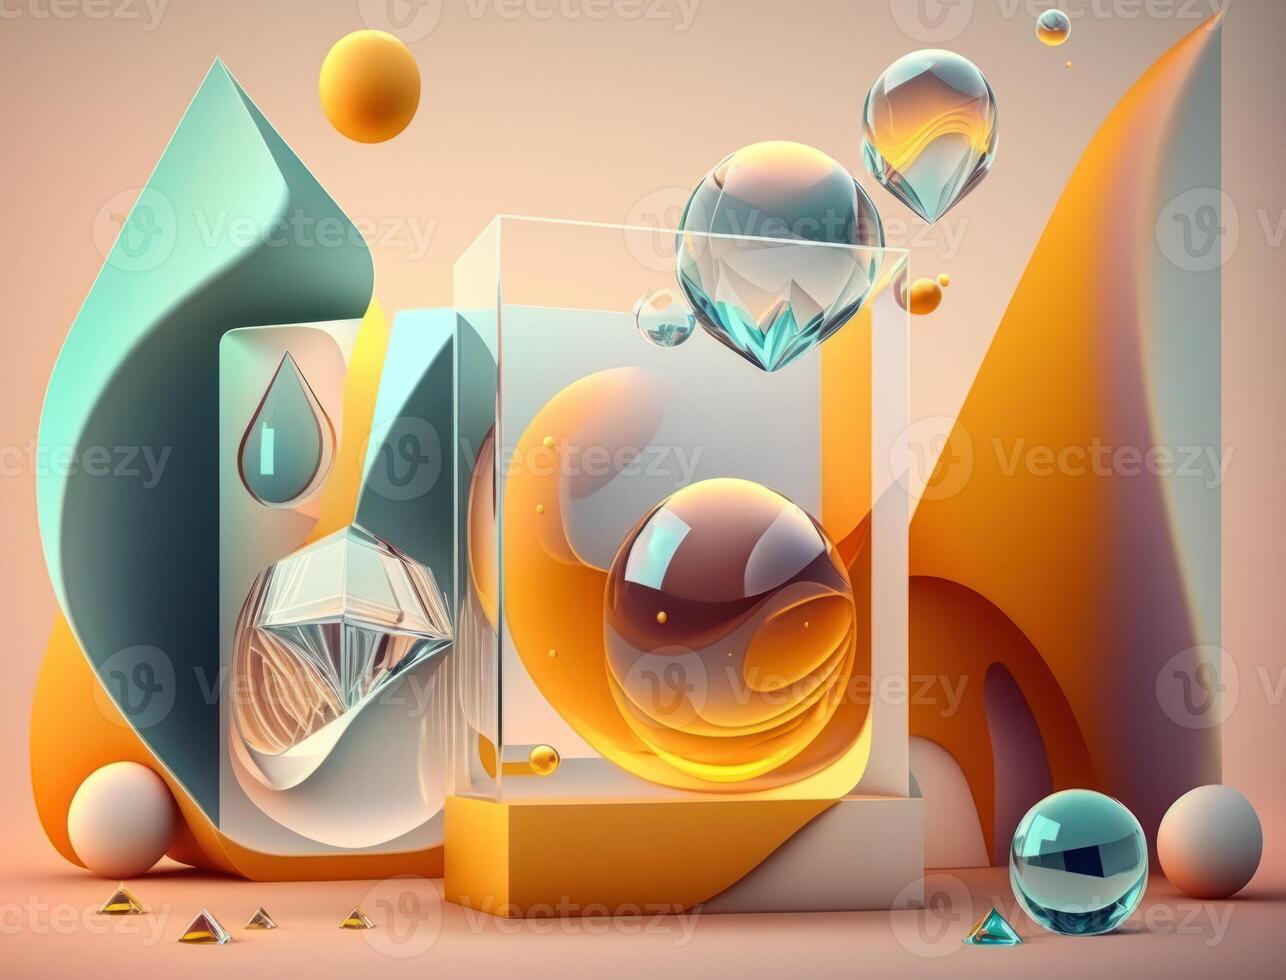 Abstract image featuring a combination of organic and geometric shapes dynamic and energetic background created with technology photo